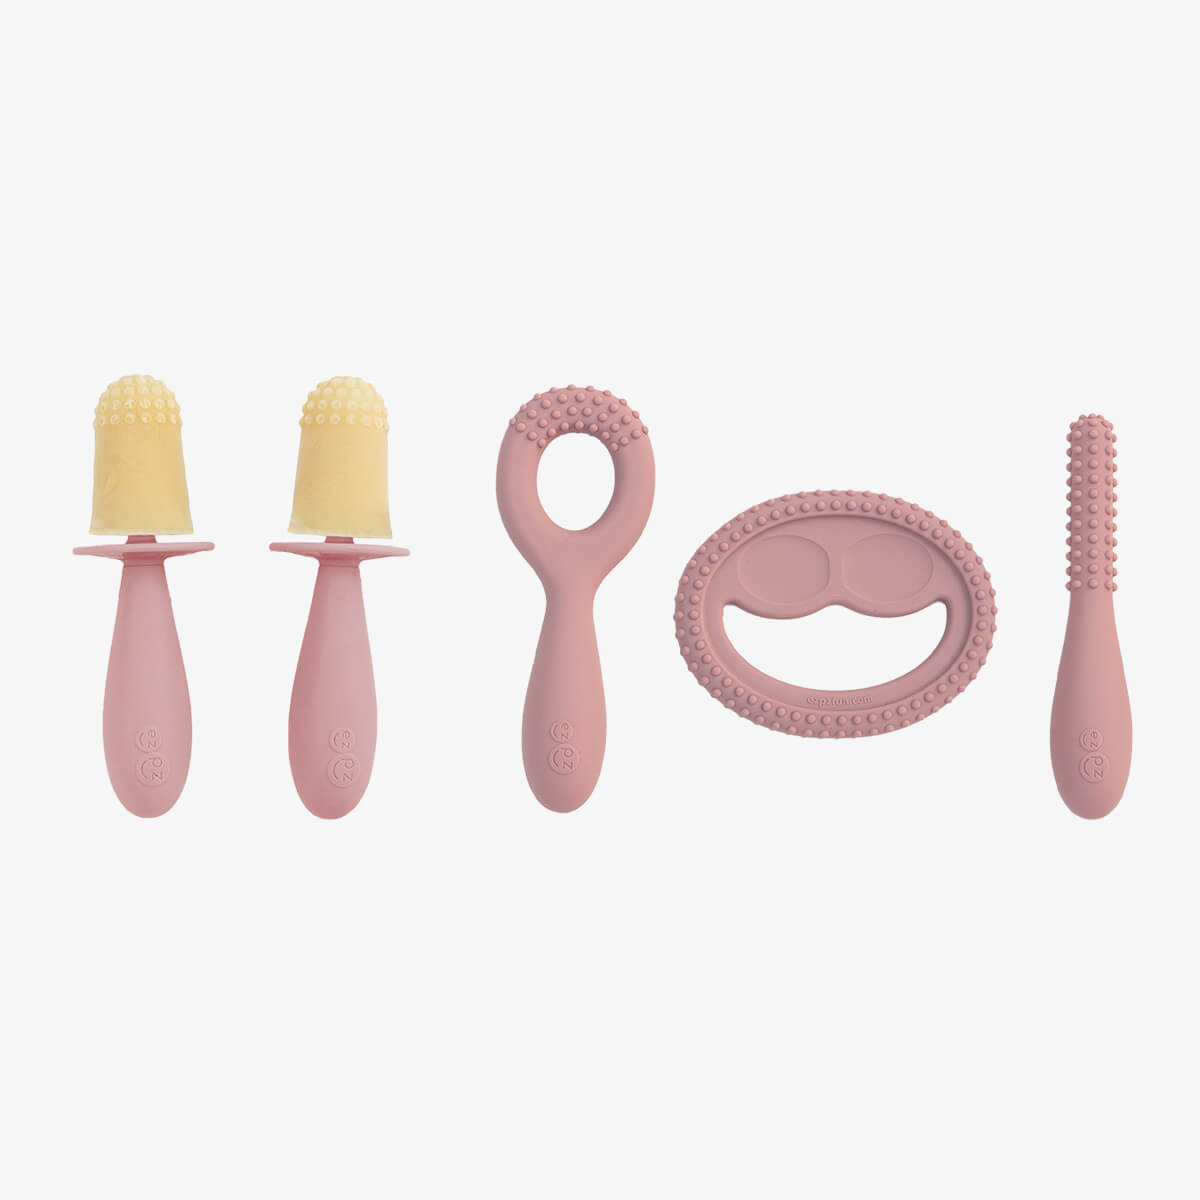 Pre-feeding set by ezpz in blush pink includes the tiny pops and oral development tools (silicone teethers)